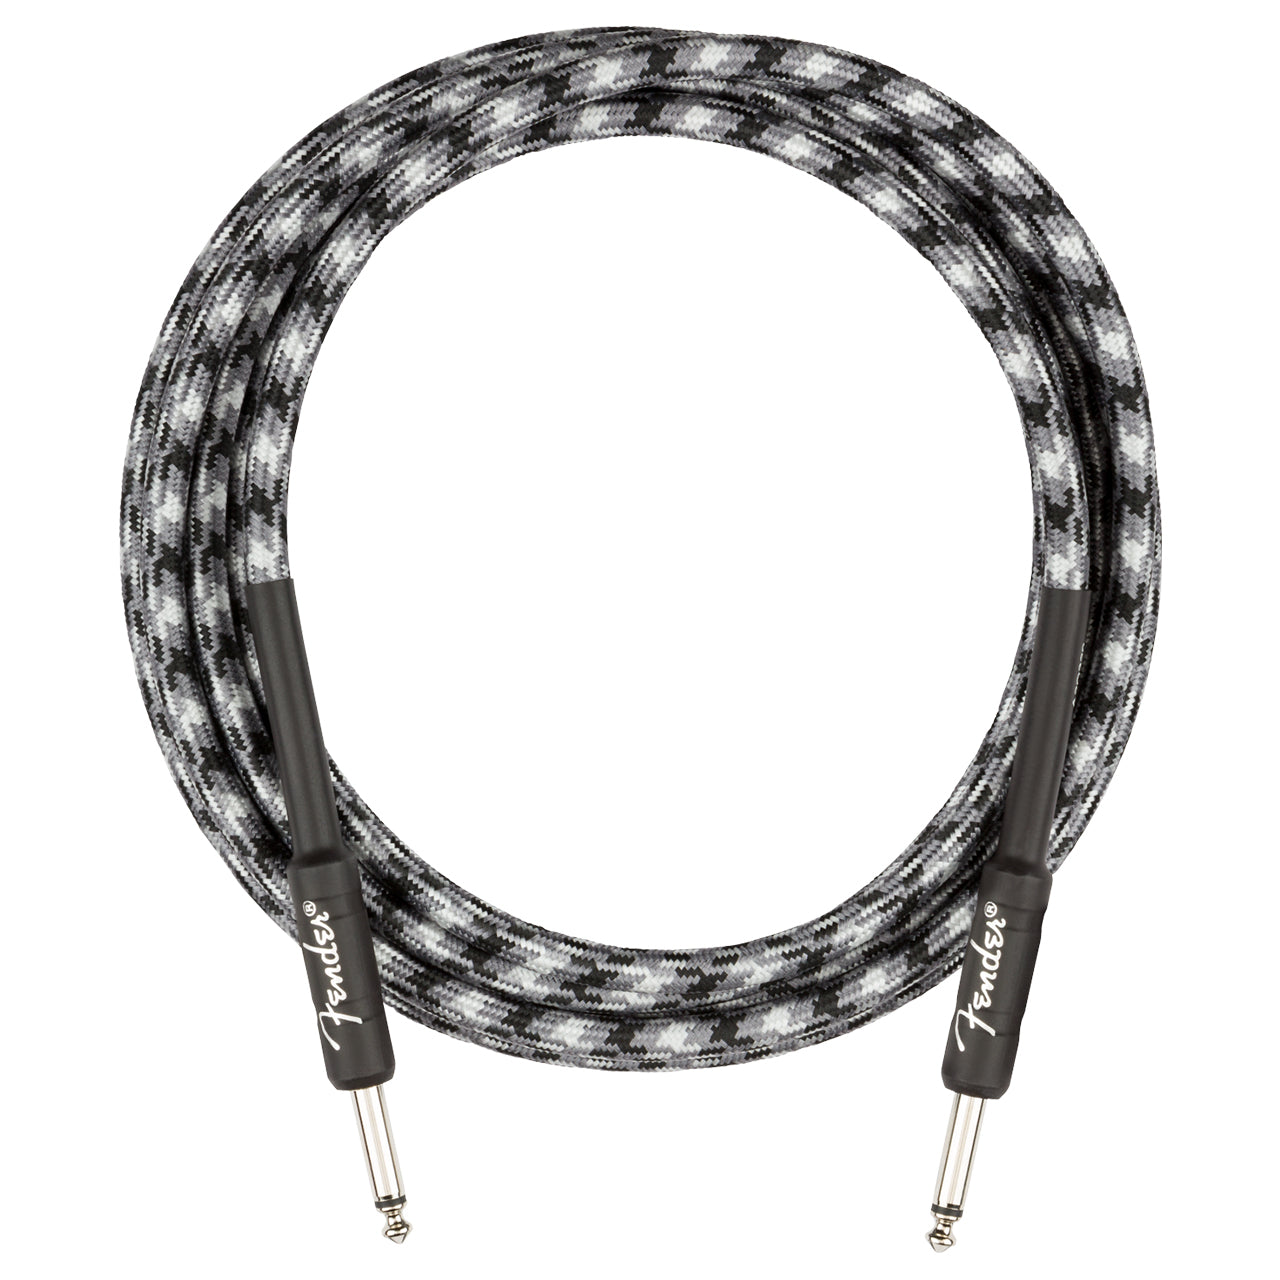 Fender Professional Series Straight/Straight 10' Instrument Cable, Winter Camo